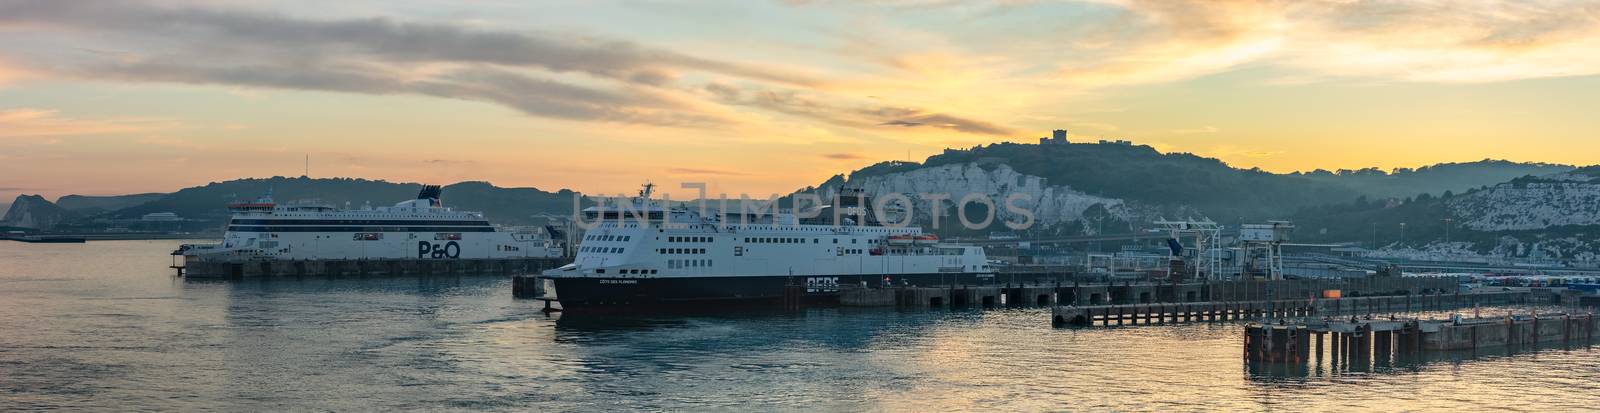 Port of Dover, England - June 24, 2020: Panoramic landscape shot of Dover Port with P&O and DFDS ferry boats docked at sunset. Beautiful warm orange sky and hills in the background.